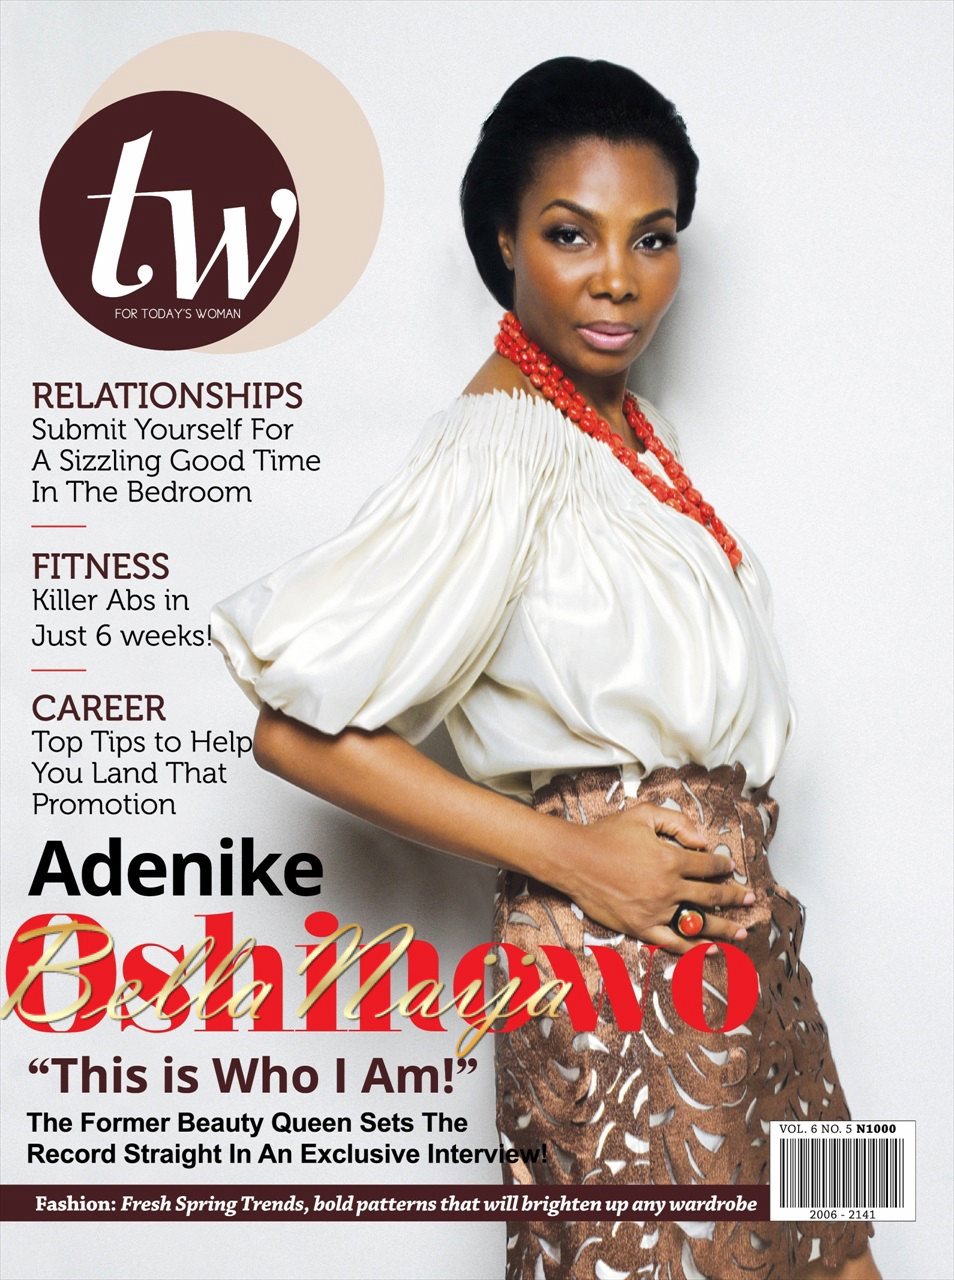 This is Who I Am!" Queen Nike Oshinowo covers Magazine's April 2013 | BellaNaija